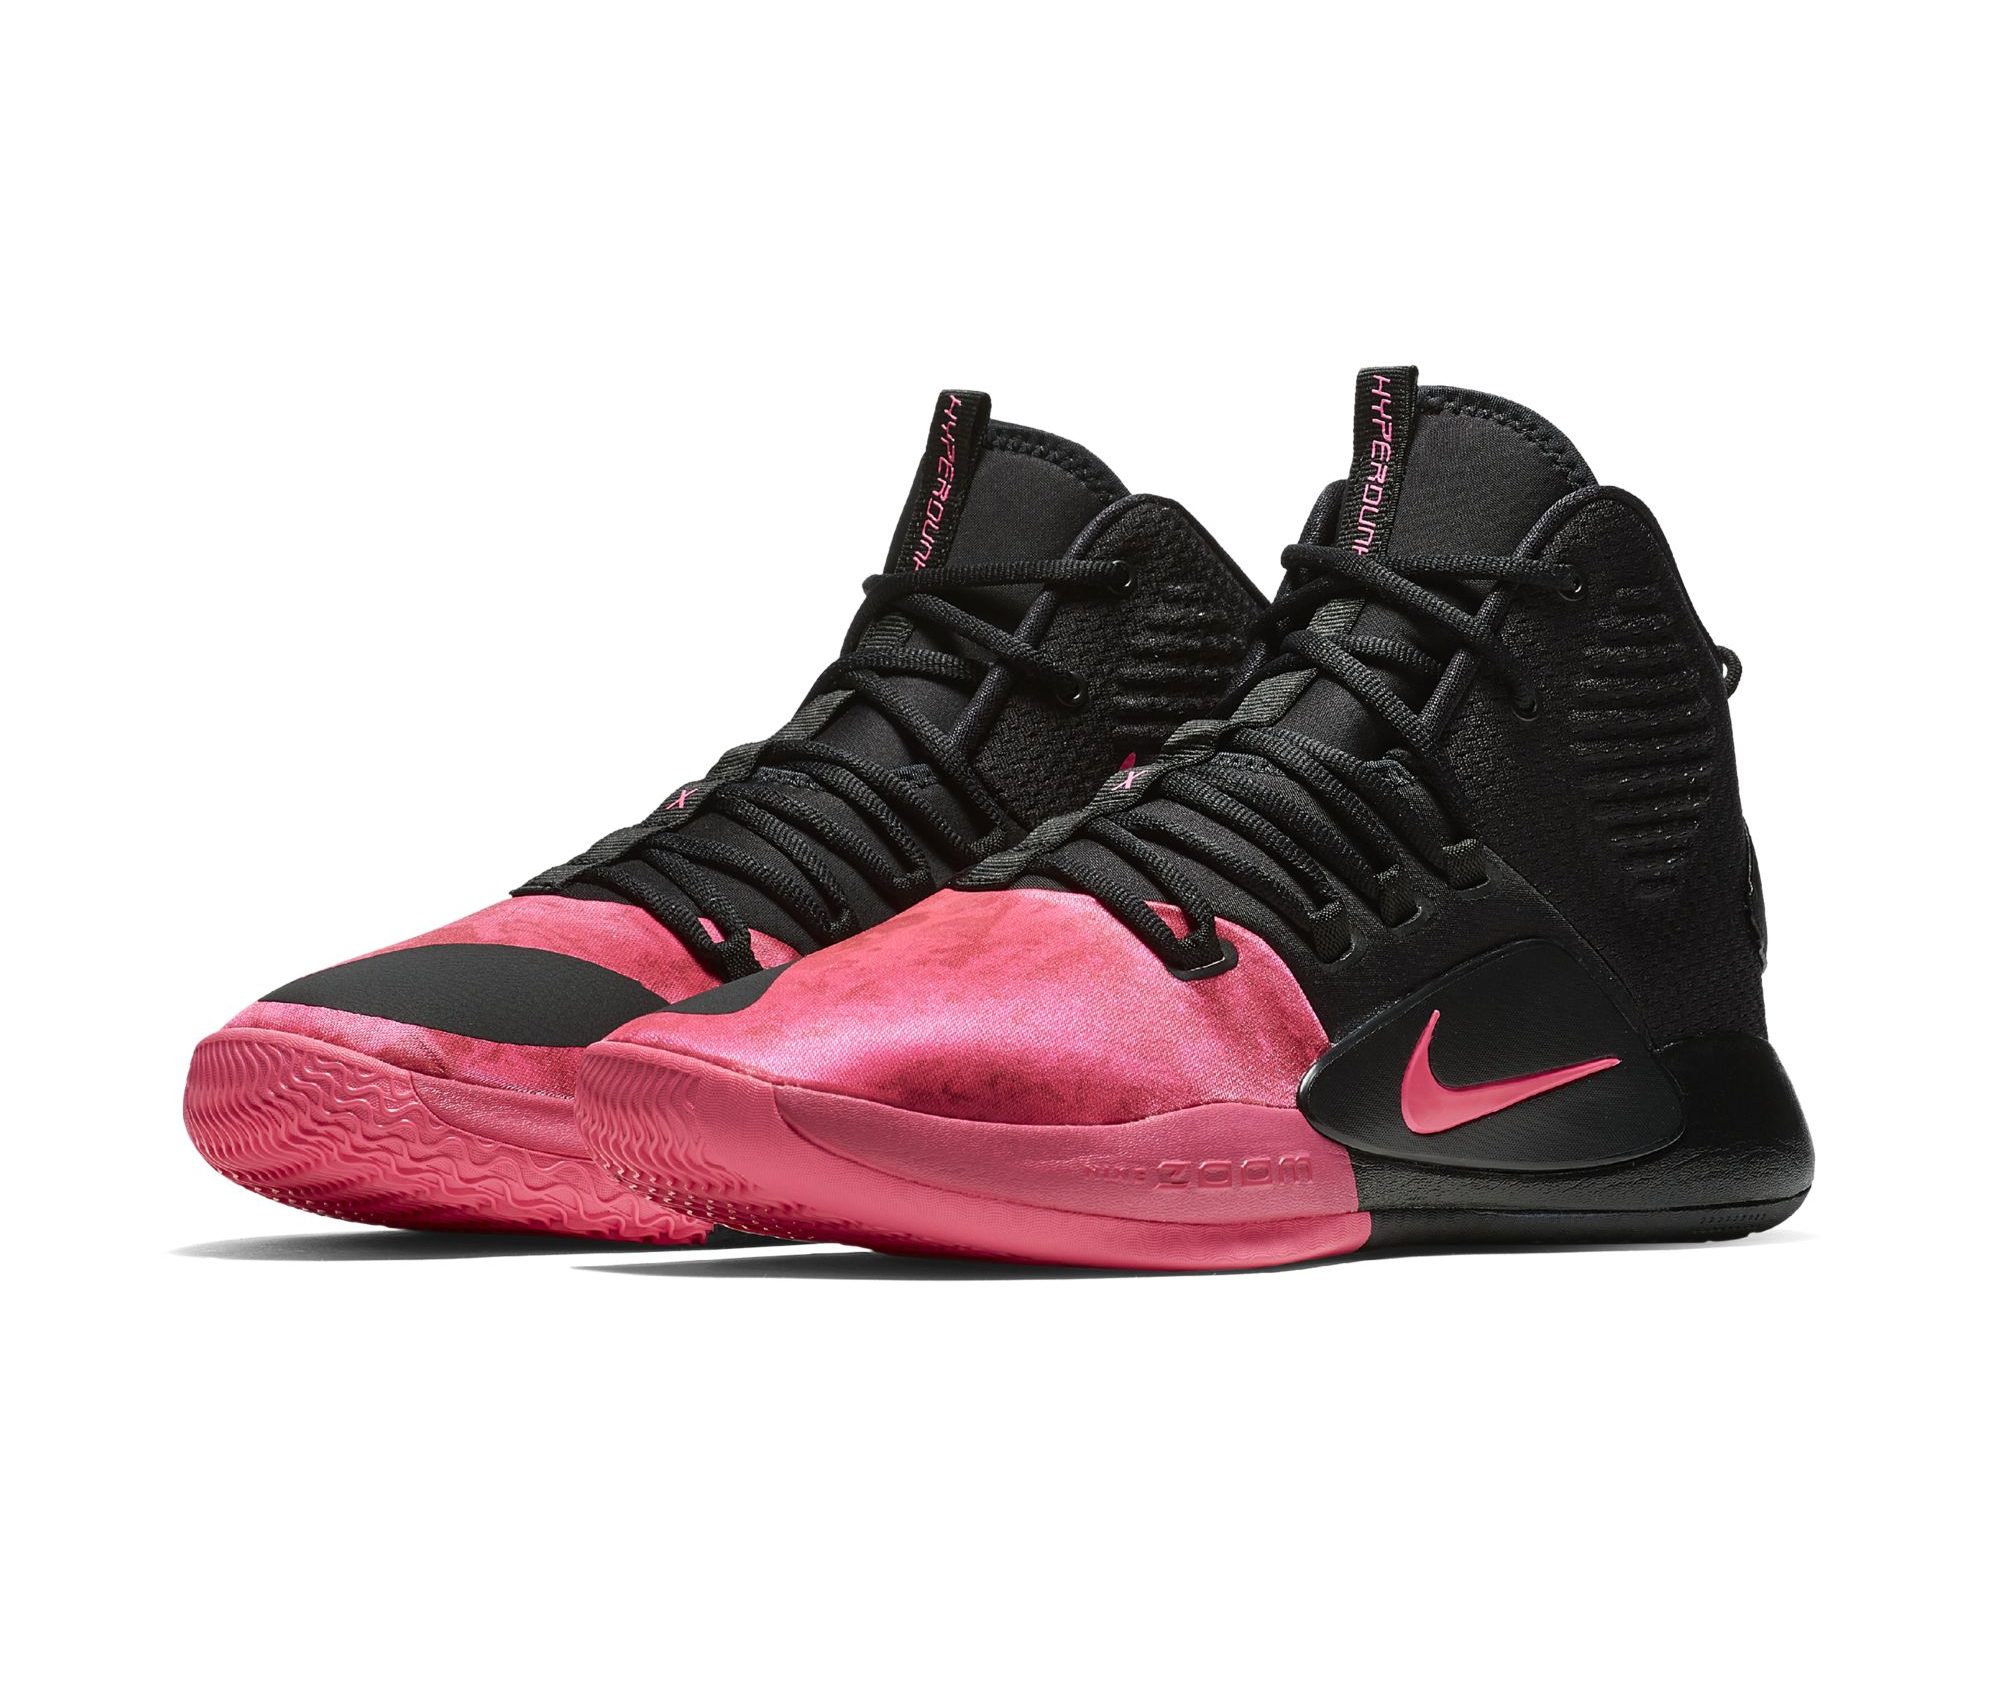 The Nike Hyperdunk X 'Kay Yow' Has Leaked Ahead of Breast Cancer 